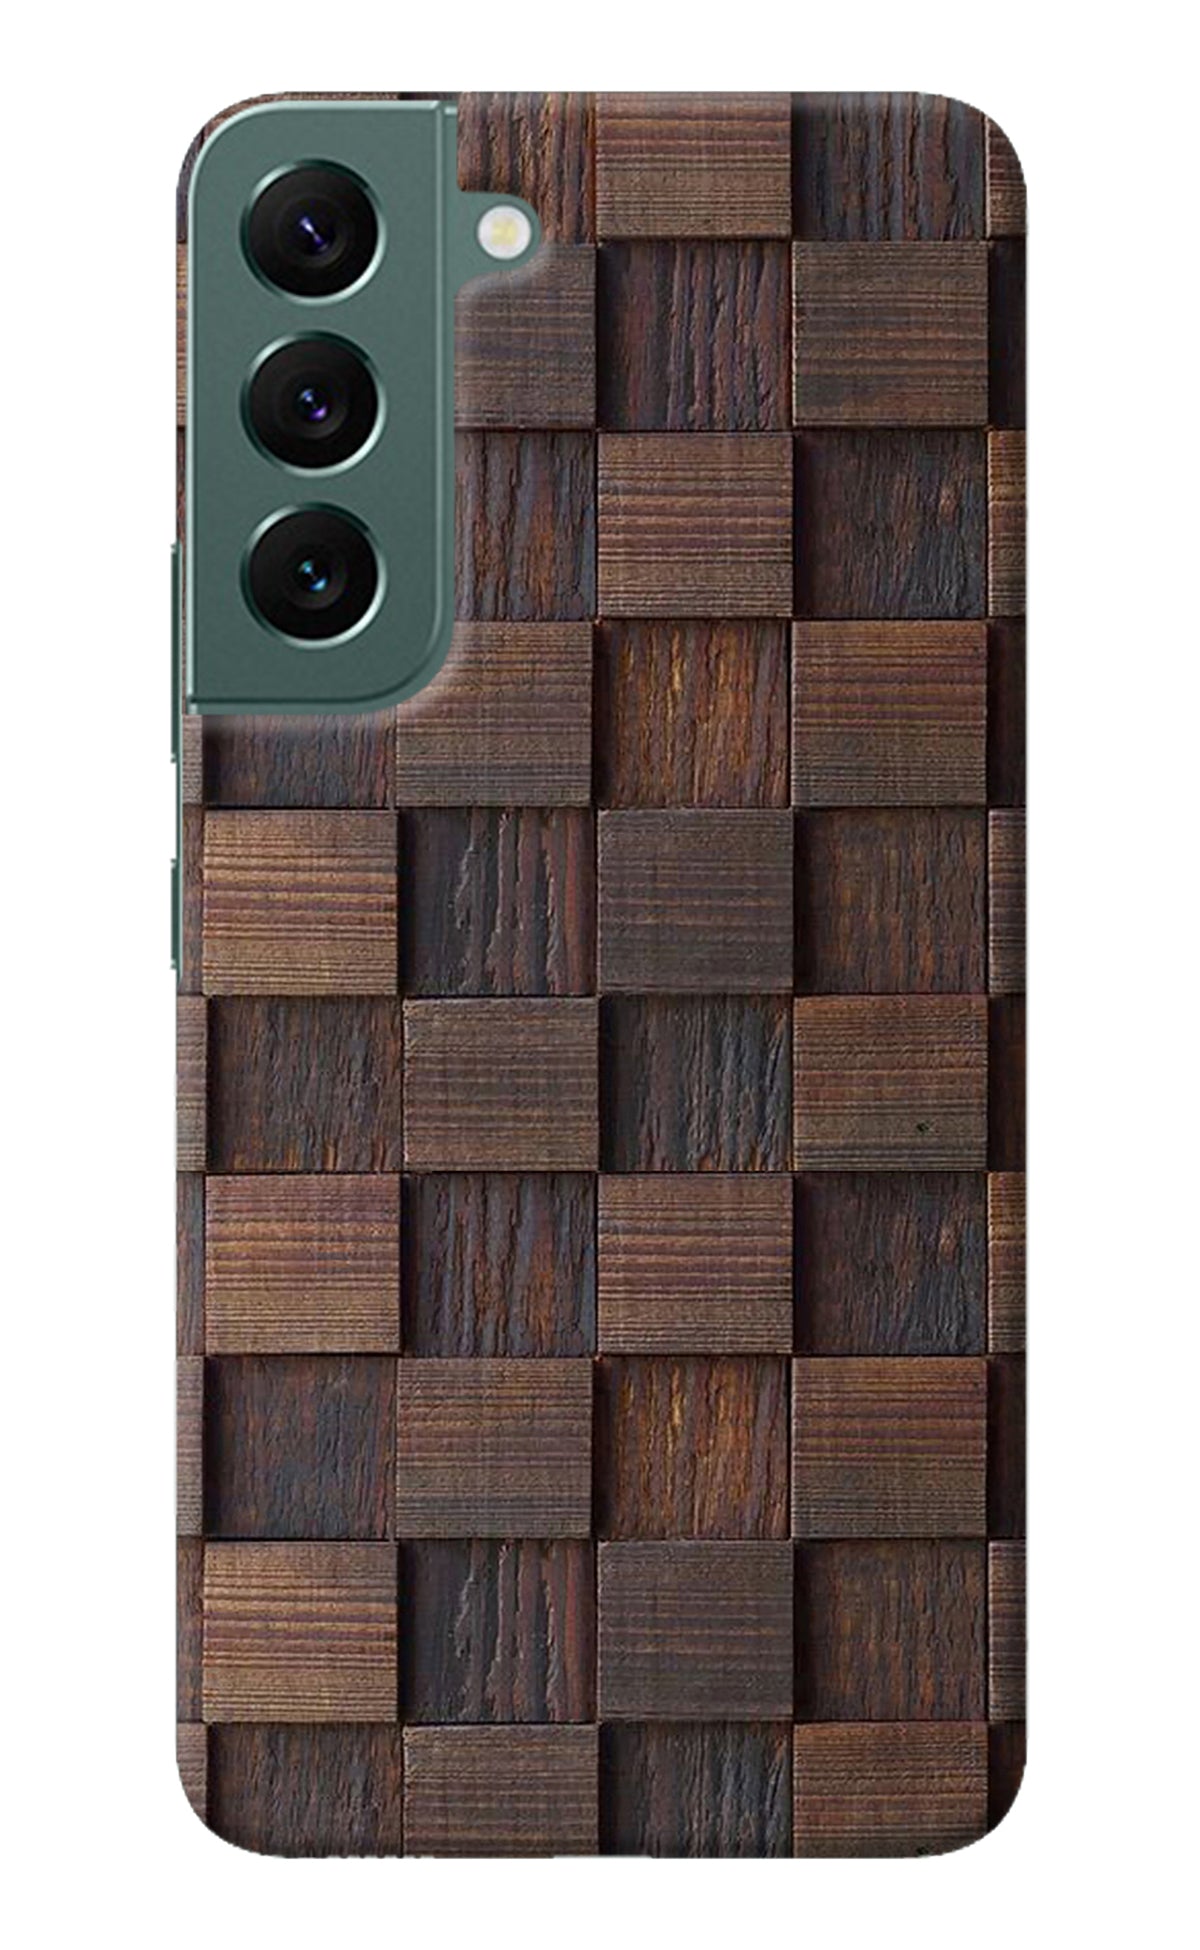 Wooden Cube Design Samsung S22 Back Cover